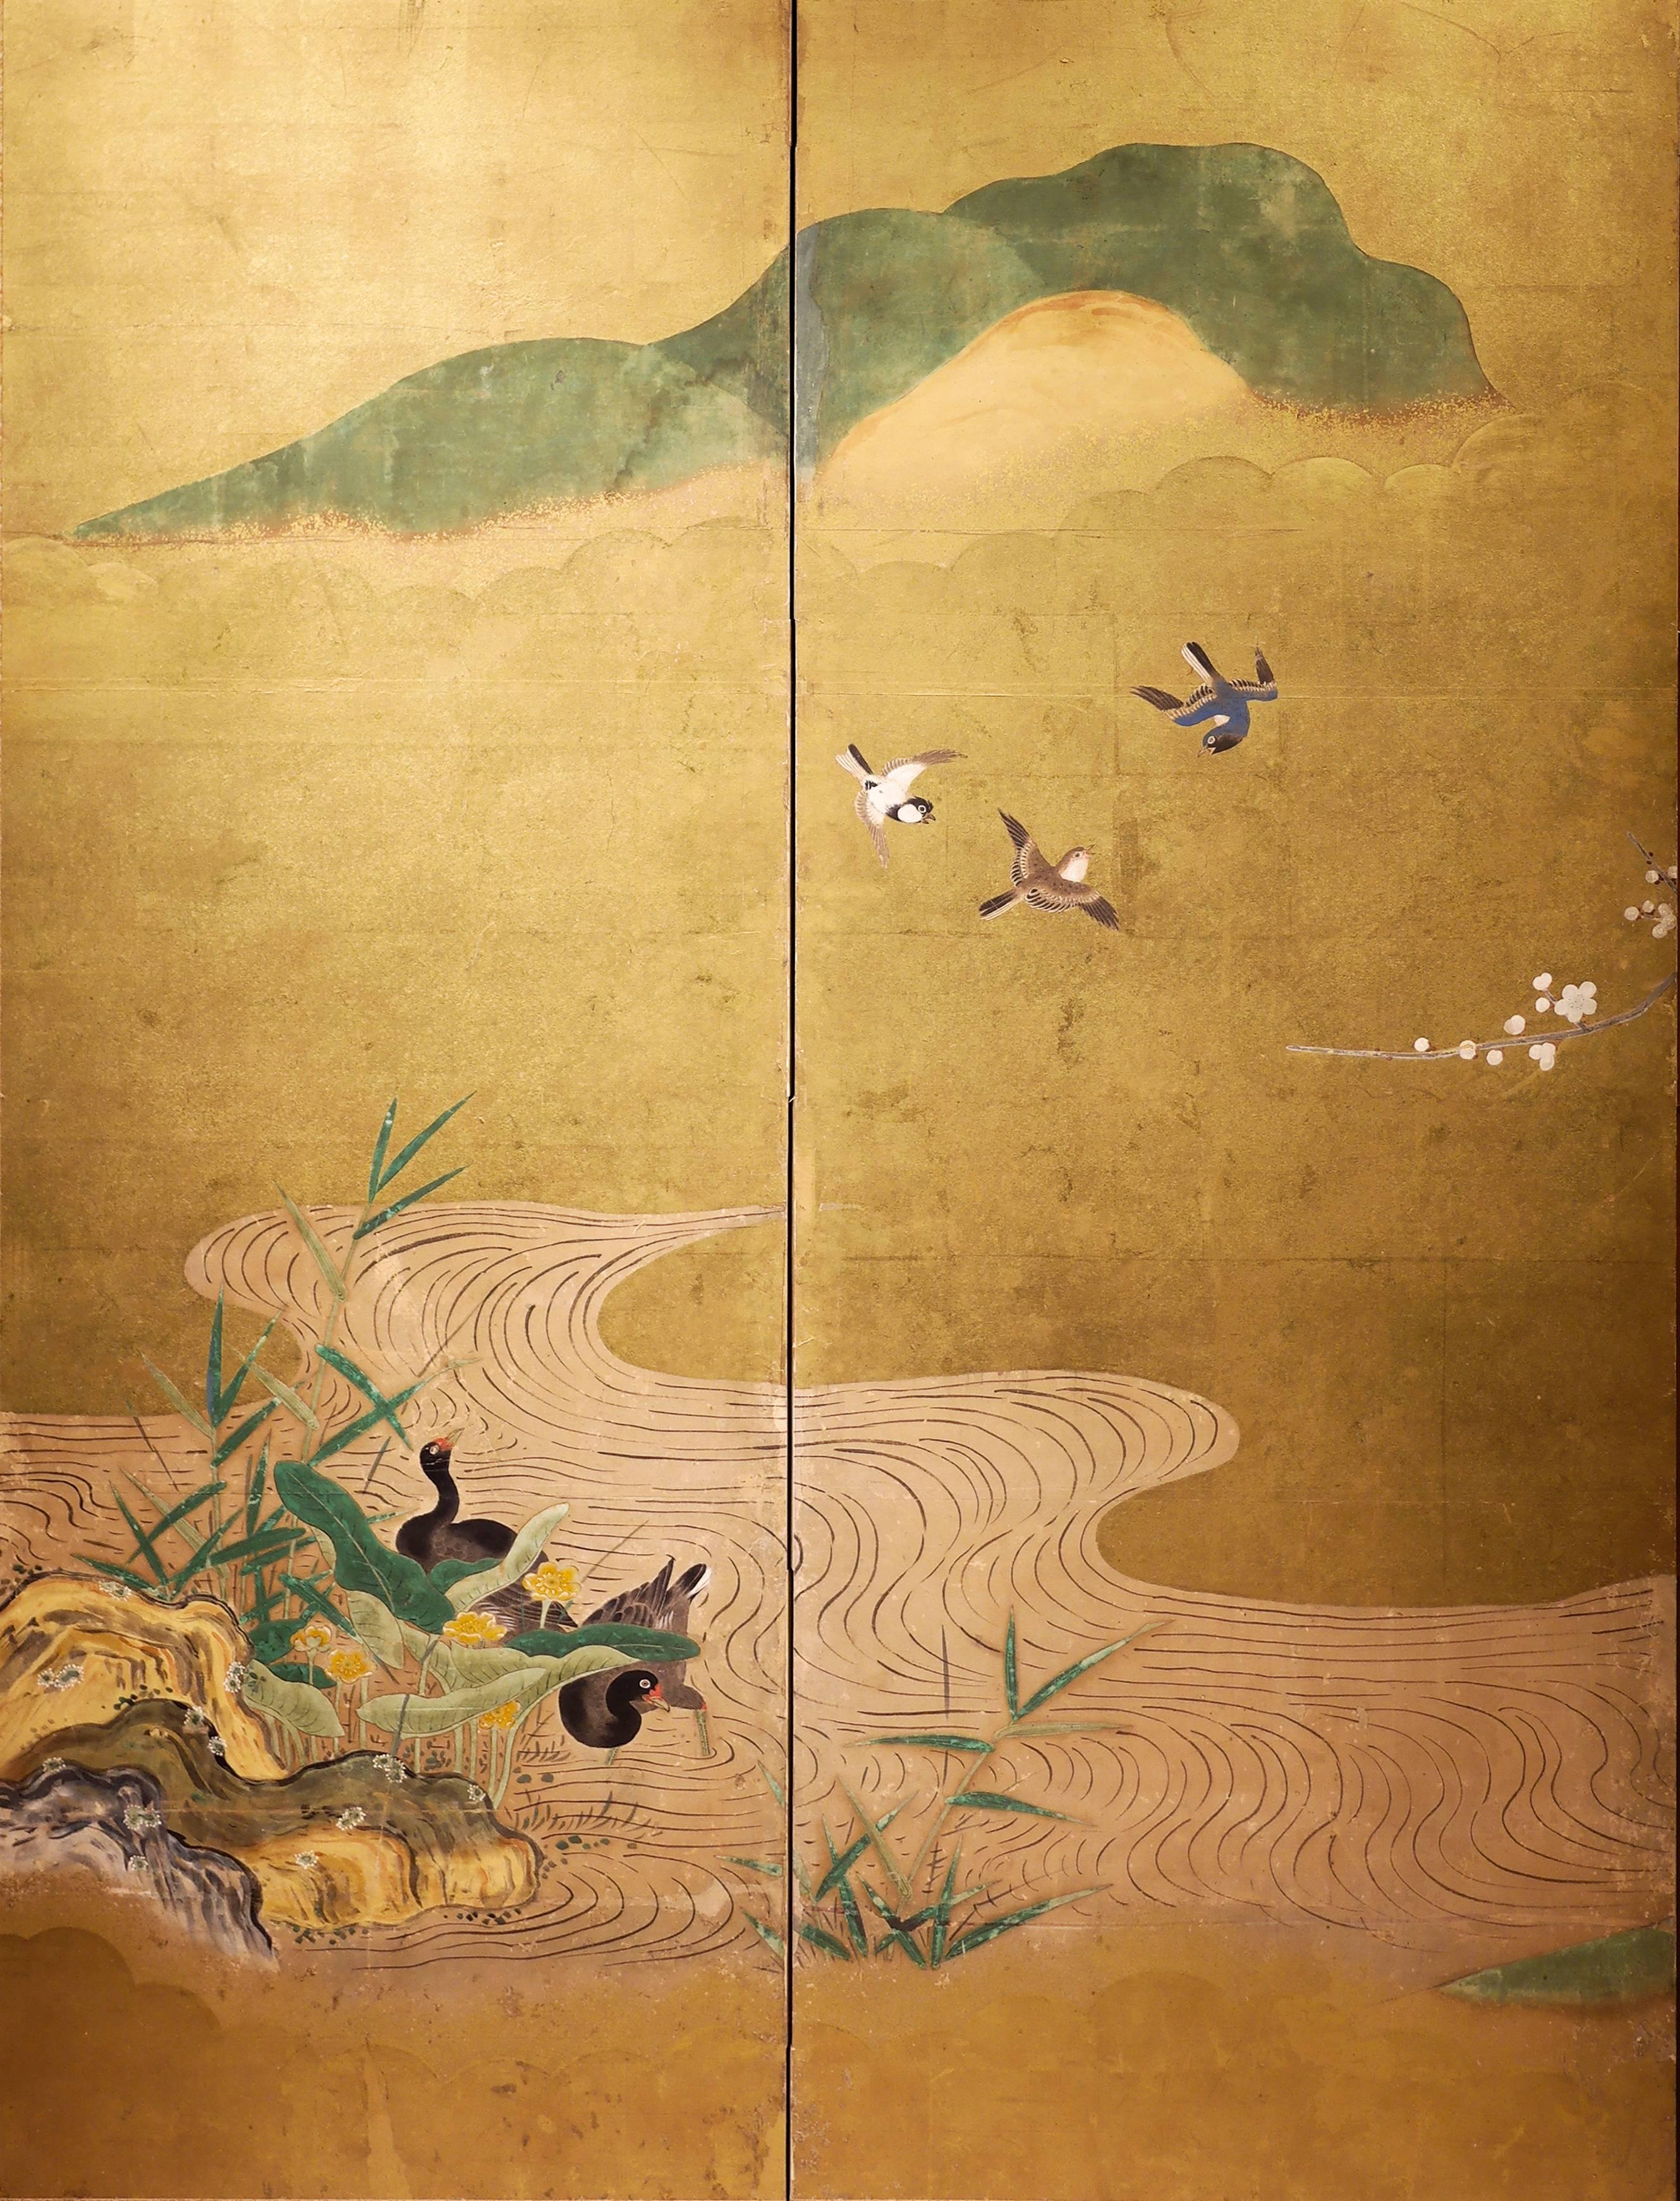 Kare-e (Chinese style painting) has a profound influence on Japanese screen painting. Here in this early 19th century screen, tiny birds, ducks, and plum trees depicted with acute observational skill demonstrate how the Japanese painter combined the